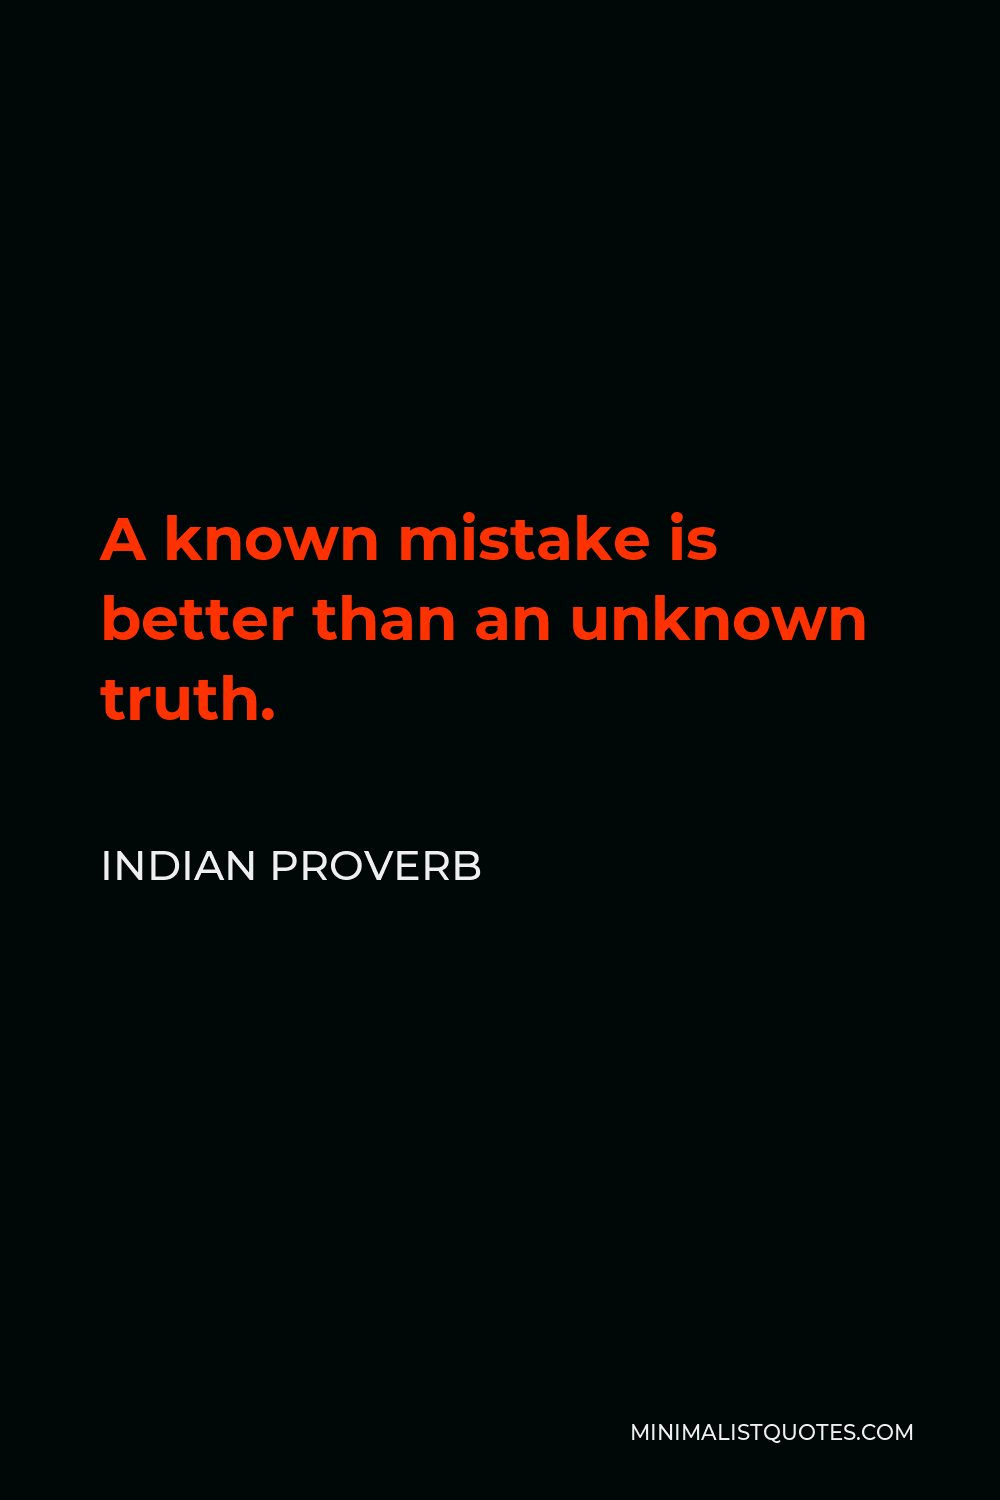 Indian Proverb Quote - A known mistake is better than an unknown truth.